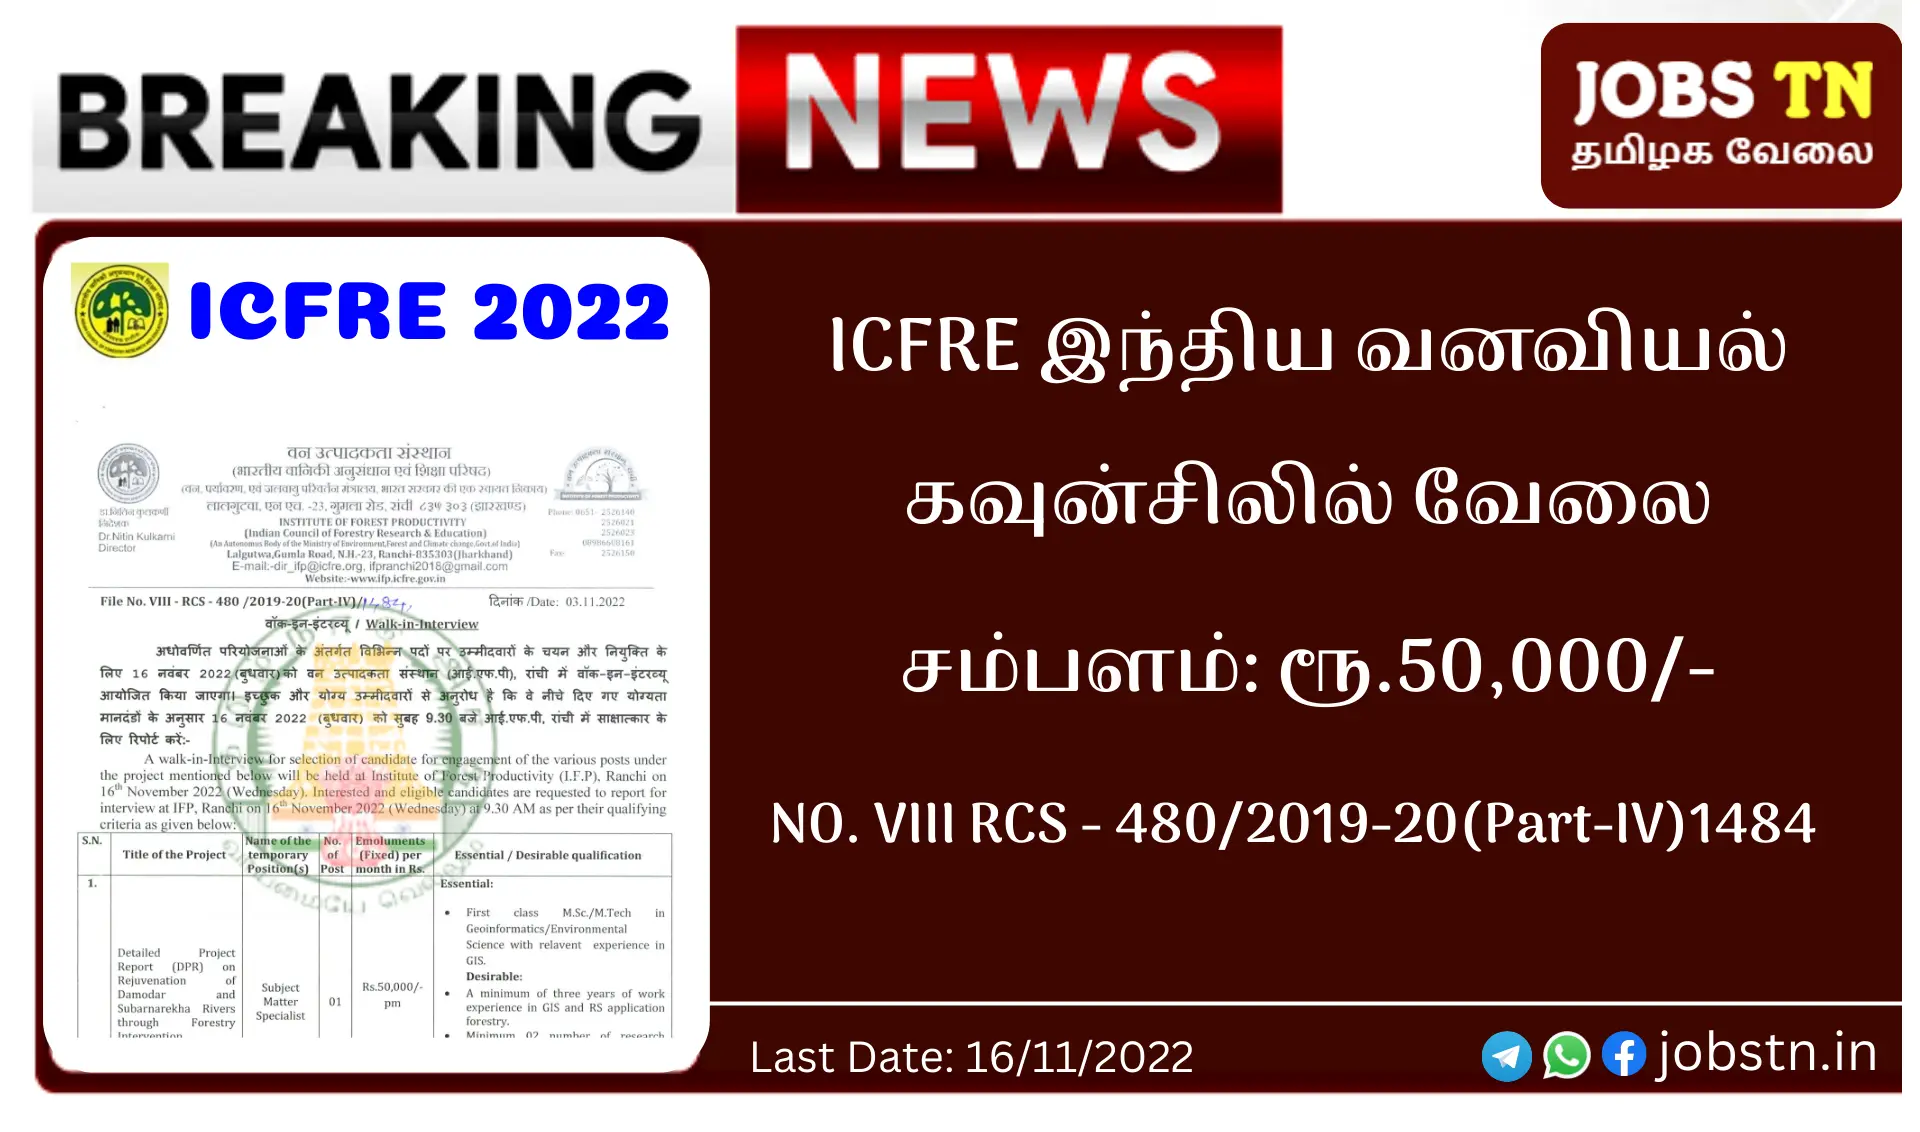 Indian Council of Forestry Research and Education jobs vacancy 2022